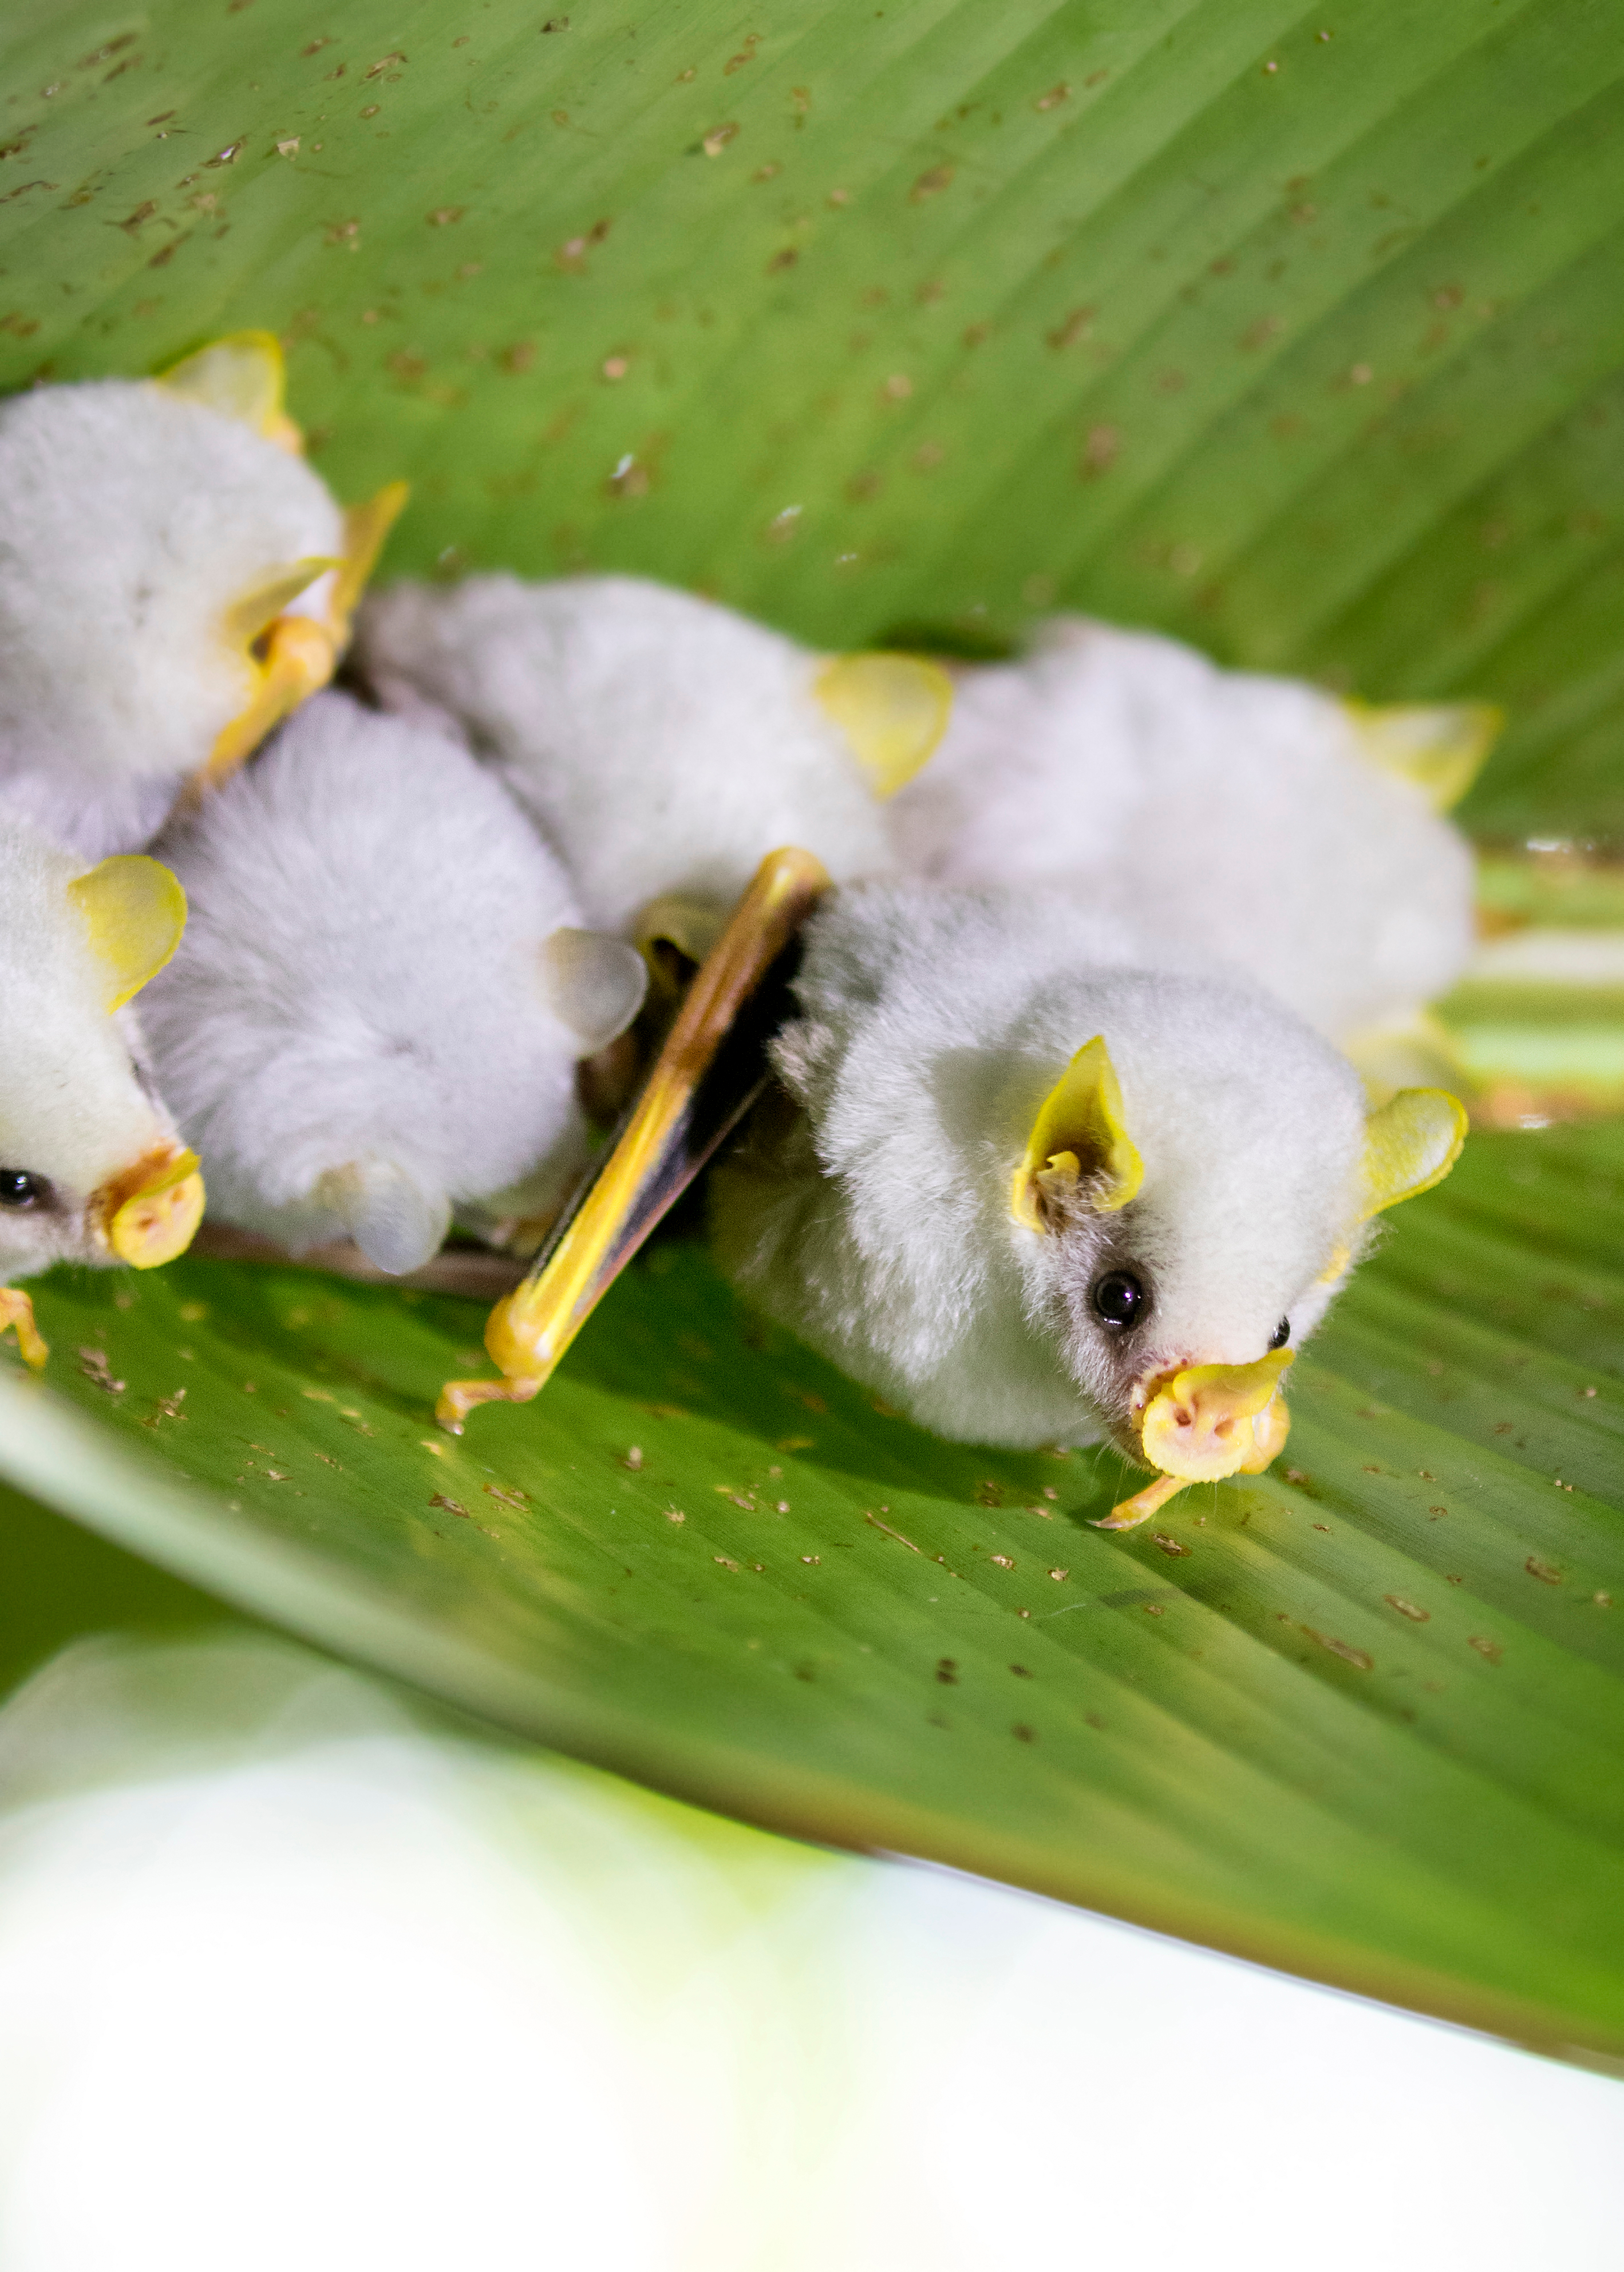 Adorable white bats on the inside of a green leaf. The nose ears and wings are all bright yellow while the eyes are black and the fur is pure white.